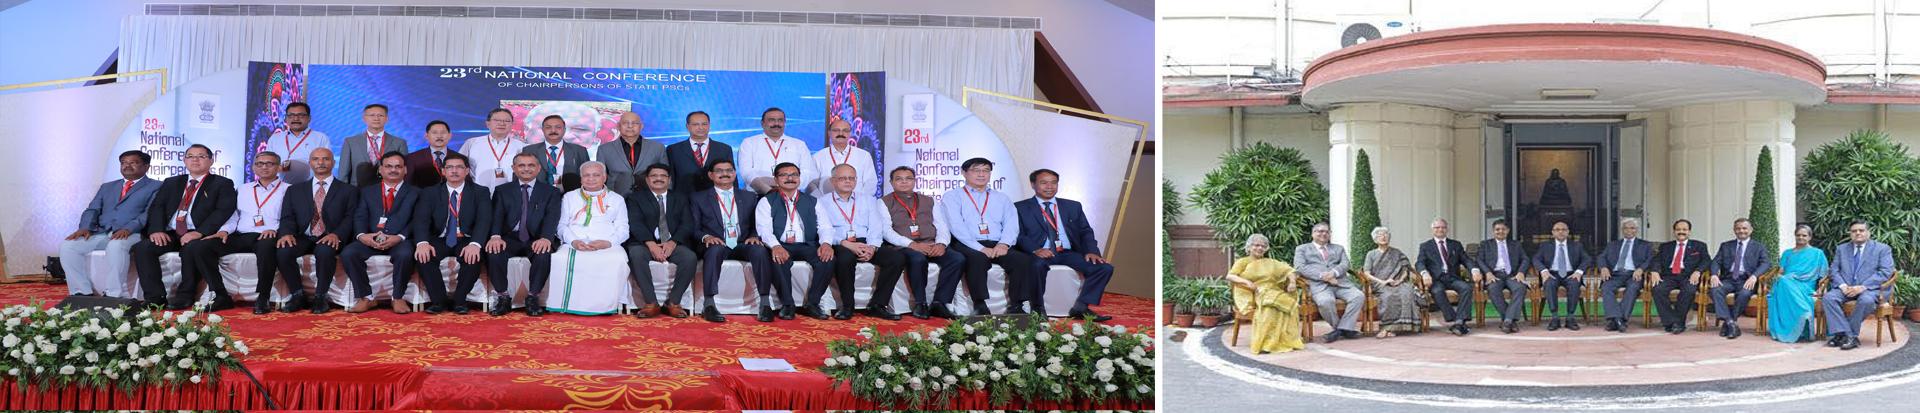 Shri Arif Mohammed Khan, Hon’ble Governor of Kerala with Hon’ble Chairman, UPSC and the Hon’ble Chairpersons of the State Public Service Commissions on the occasion of the 23rd National Conference of Chairpersons of State Public Service Commissions.